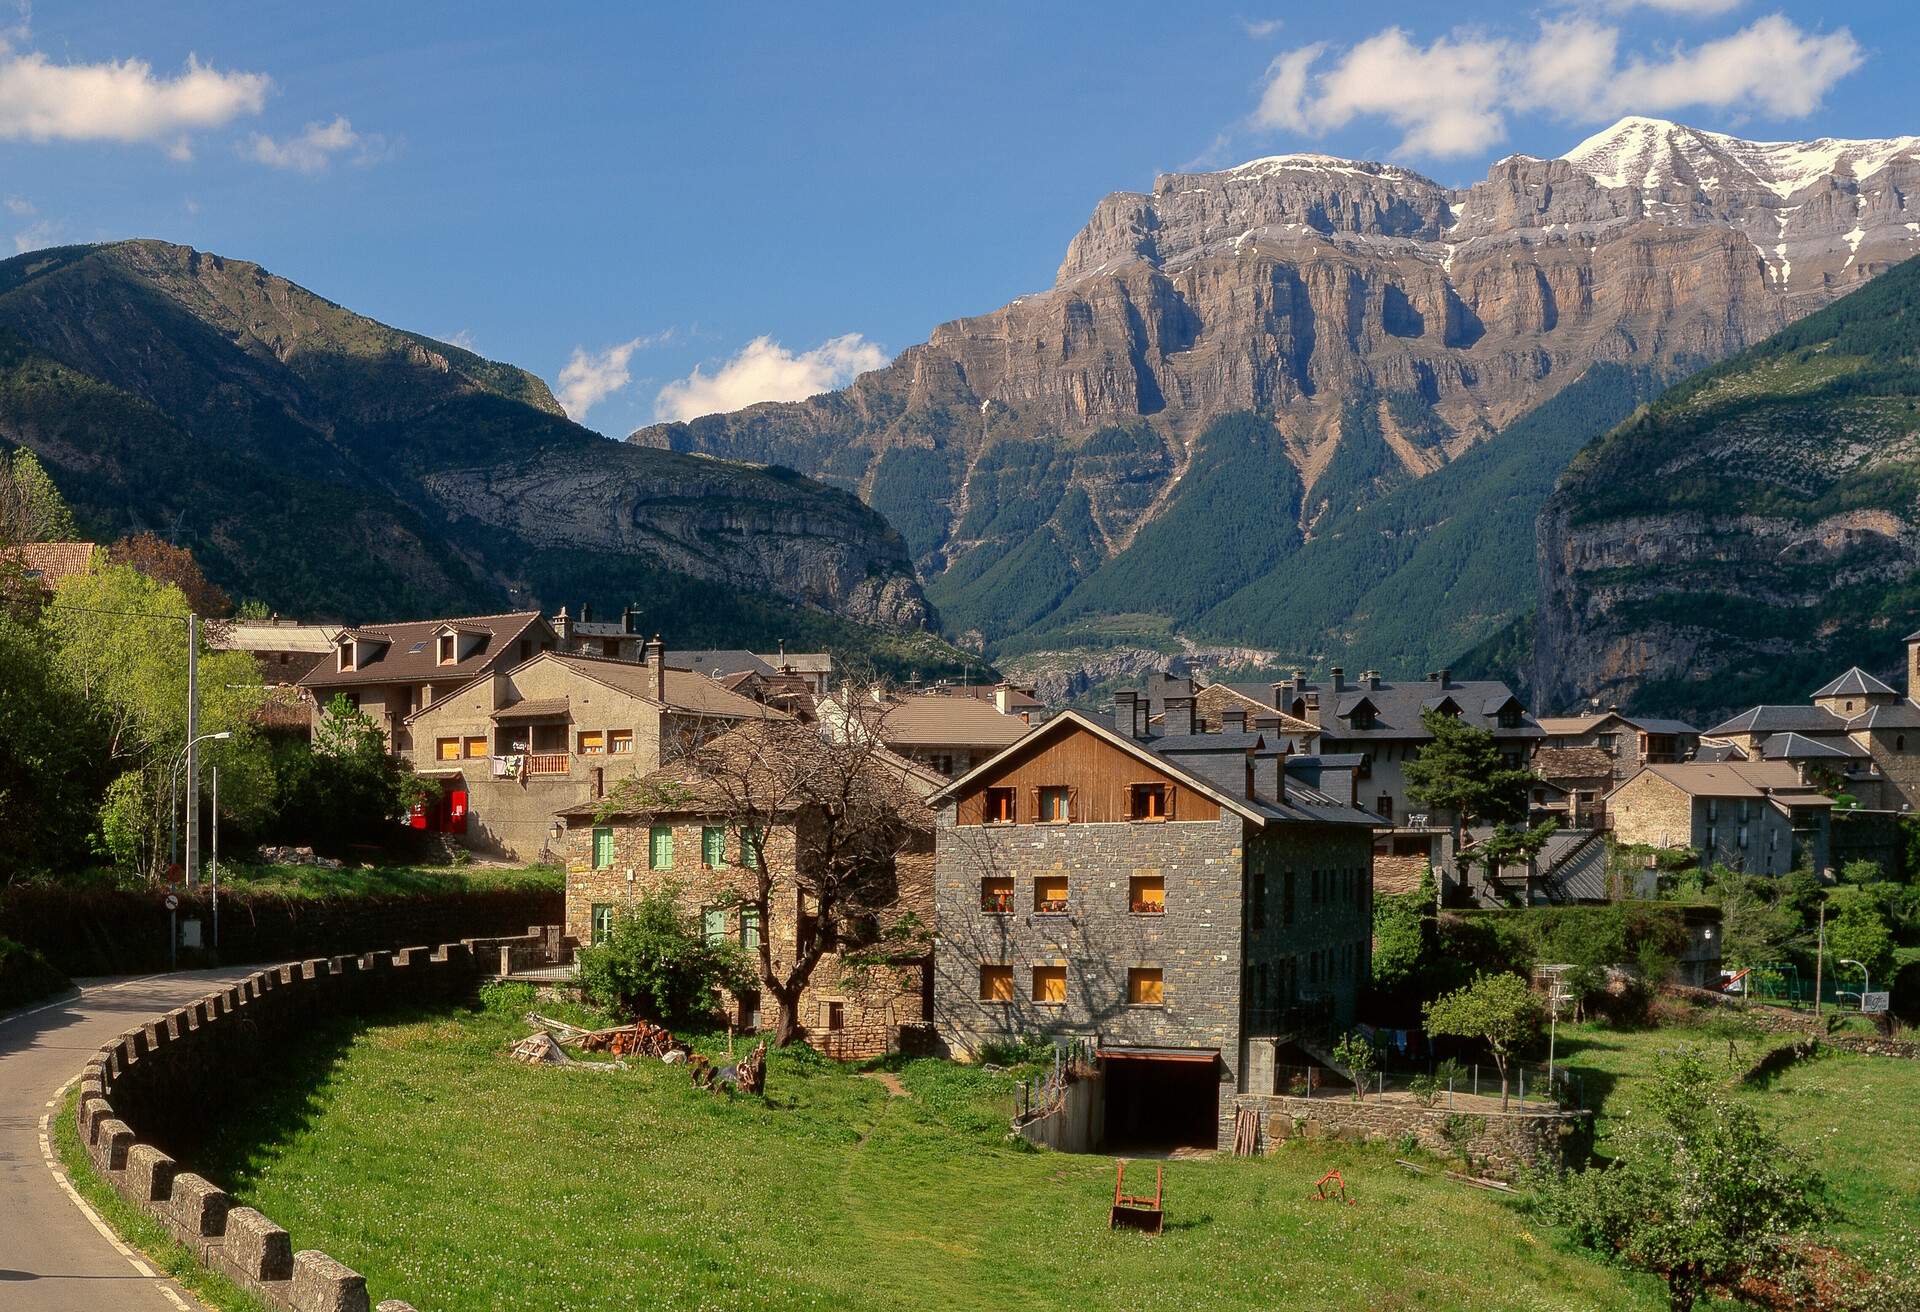 The town of Torla is the main entrance to the Ordesa y Monte Perdido National Park, which is a foretaste of the extraordinary mountain scenery which encompasses the national park in the Spanish Pyrenees.